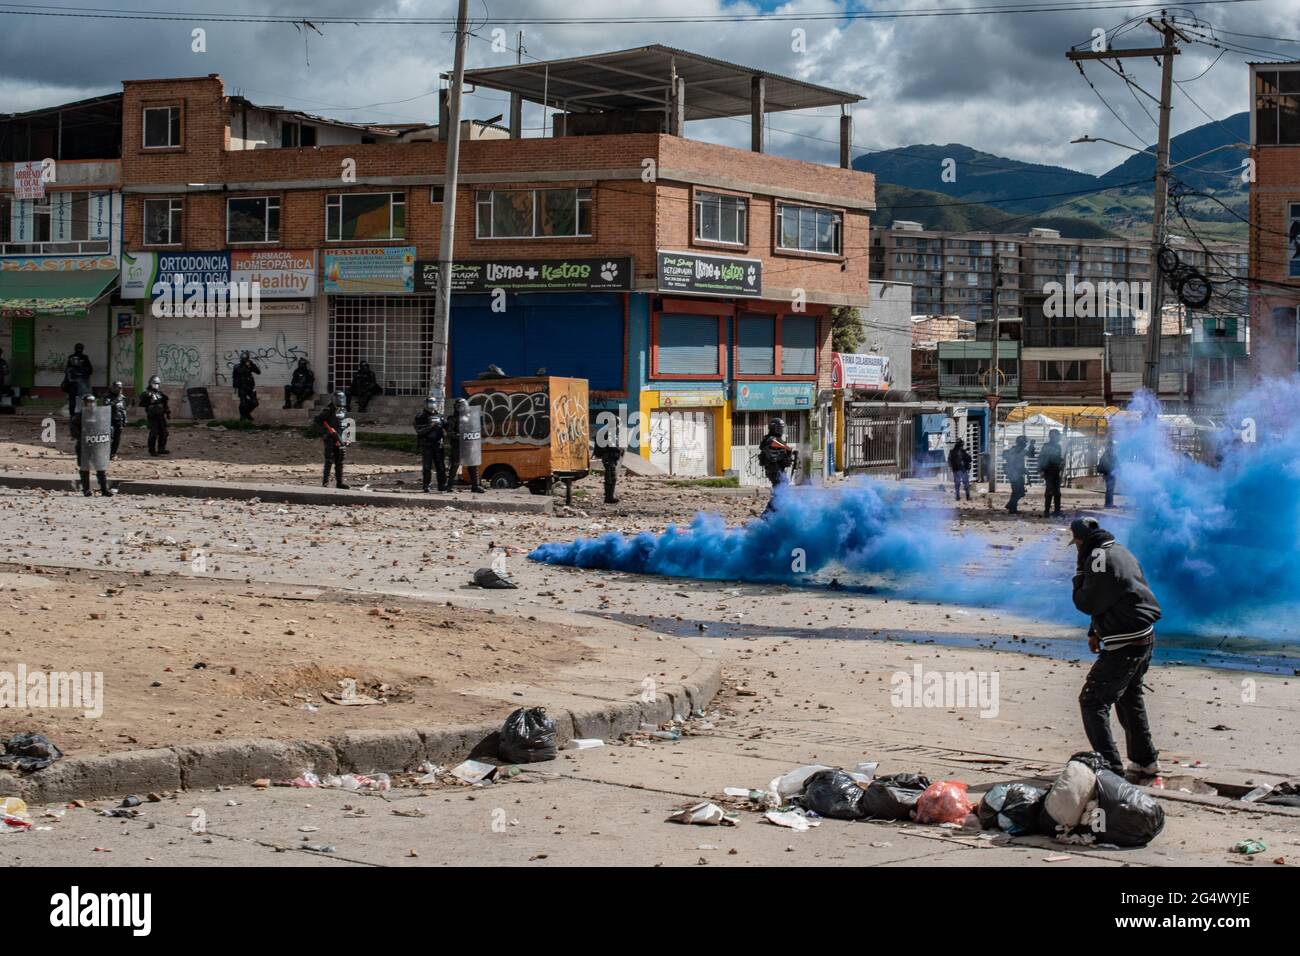 Bogota, Colombia. 21st June, 2021. A blue smoke tear gas grenade blows as clashes between demonstratros and Colombia's riot police erupt anti-government protest raise in Bogota Colombia against the government of president Ivan Duque, inequalities and abuse of authority by police. Credit: Long Visual Press/Alamy Live News Stock Photo